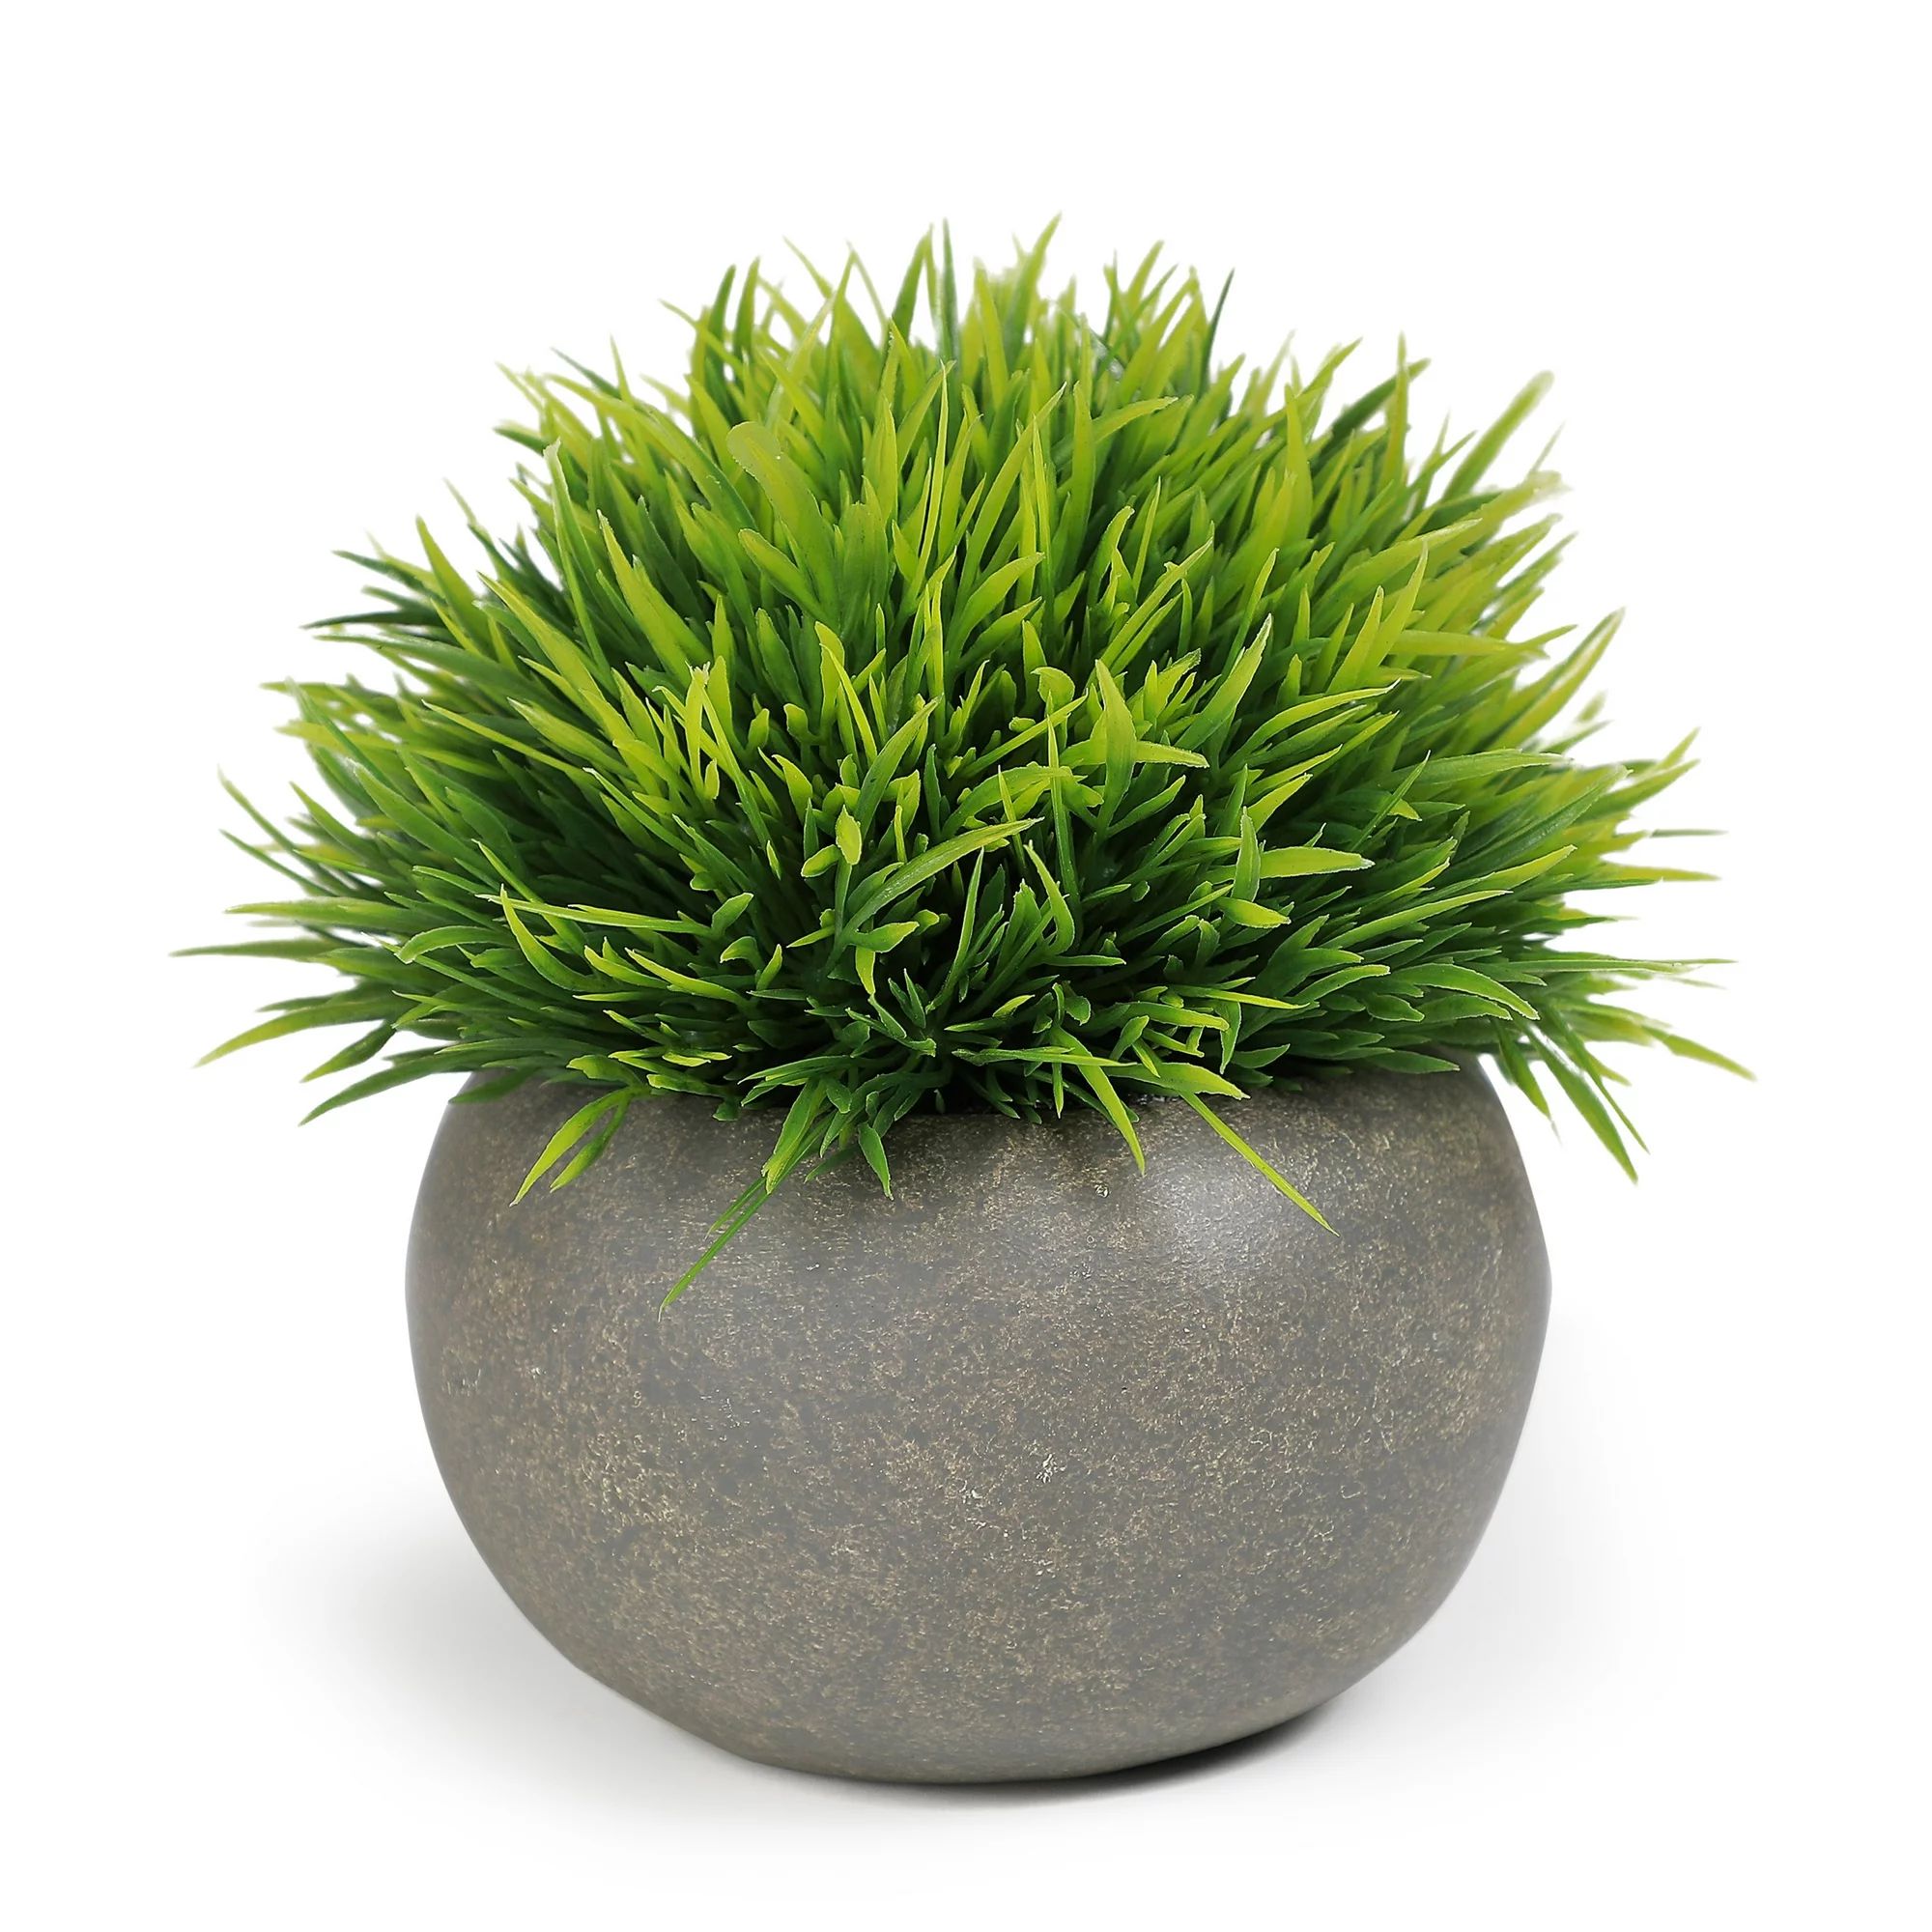 Mainstays Artificial Boxwood Plant With Cement Pot in Gray | Walmart (US)